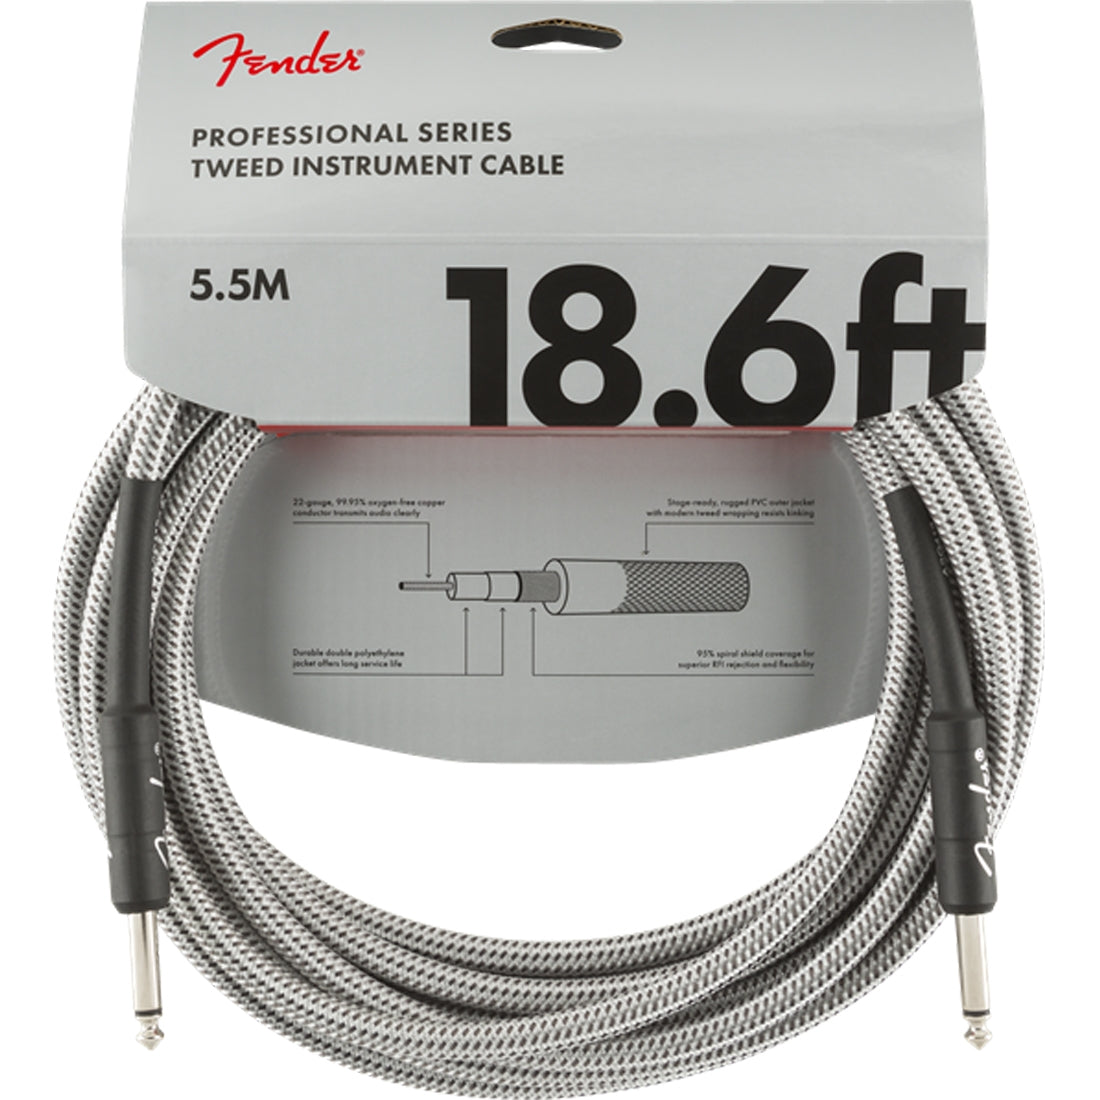 Fender Professional Series Instrument Cable 5.5m (18.6ft) White Tweed - 0990820069